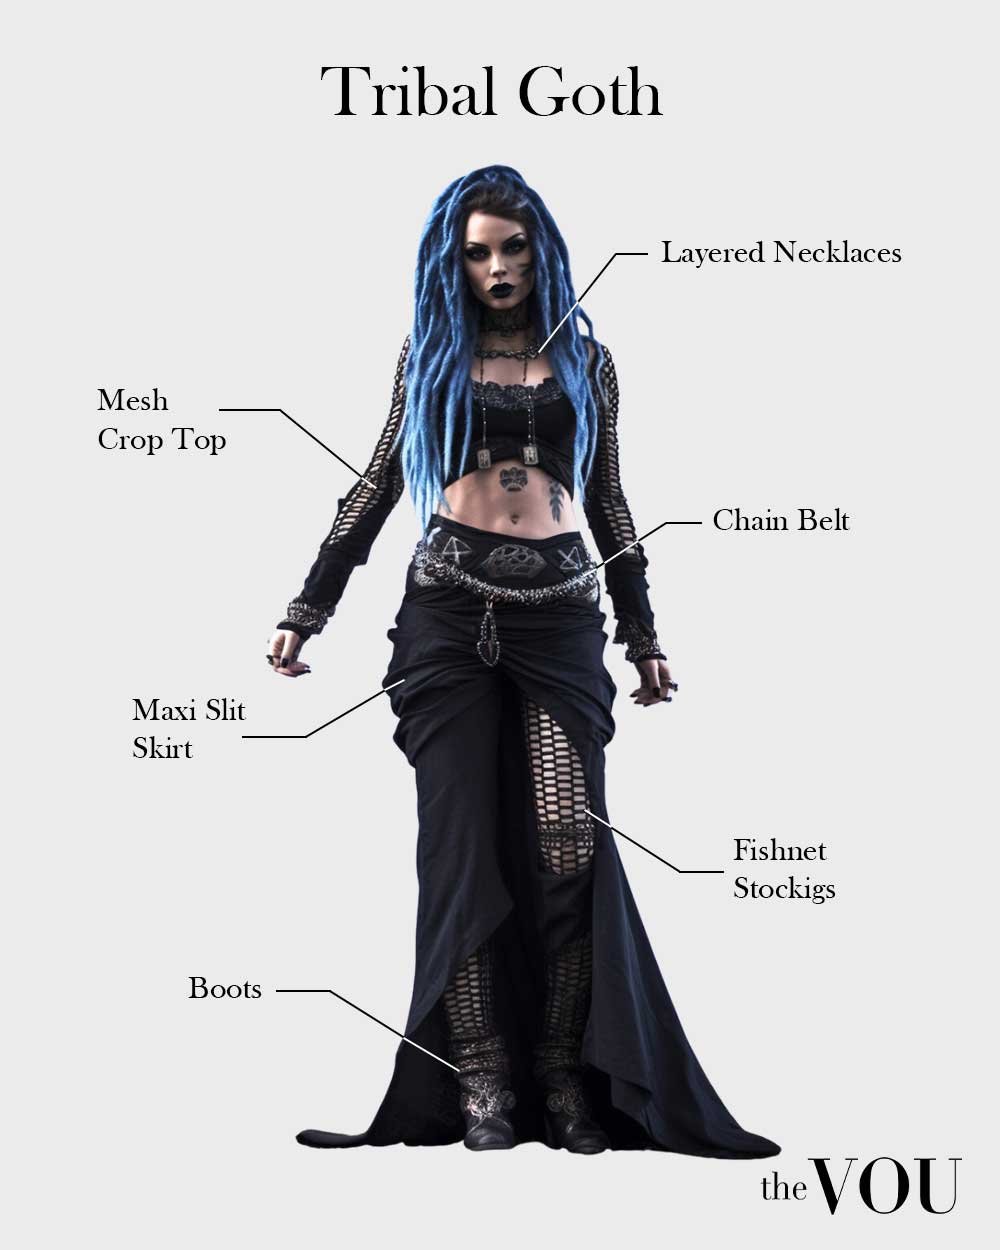 Tribal Goth outfit elements